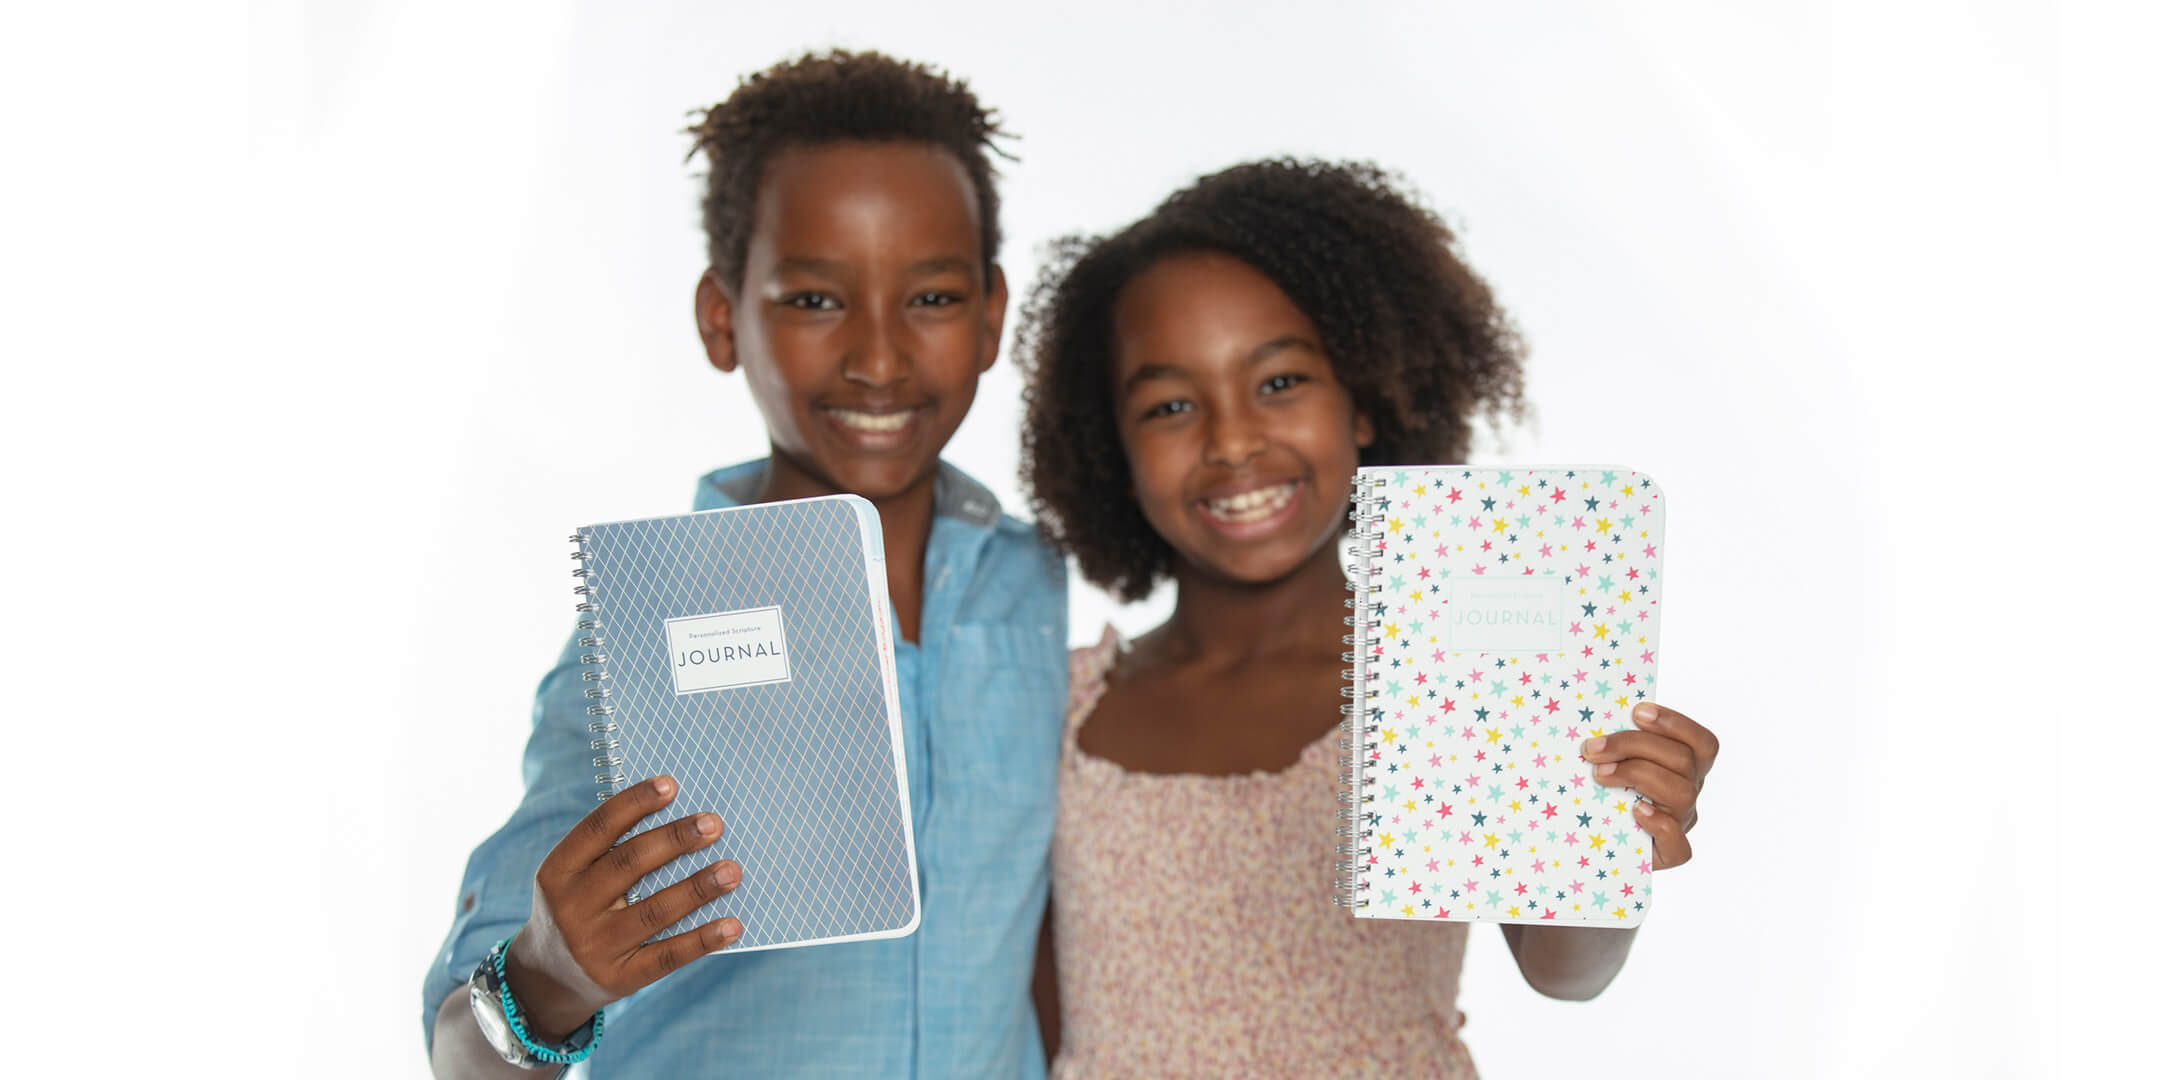 Ignite your child's faith journey with our personalized scripture journals for kids. Each journal is a treasure trove of personalized scriptures, carefully chosen to inspire and strengthen their relationship with God. 